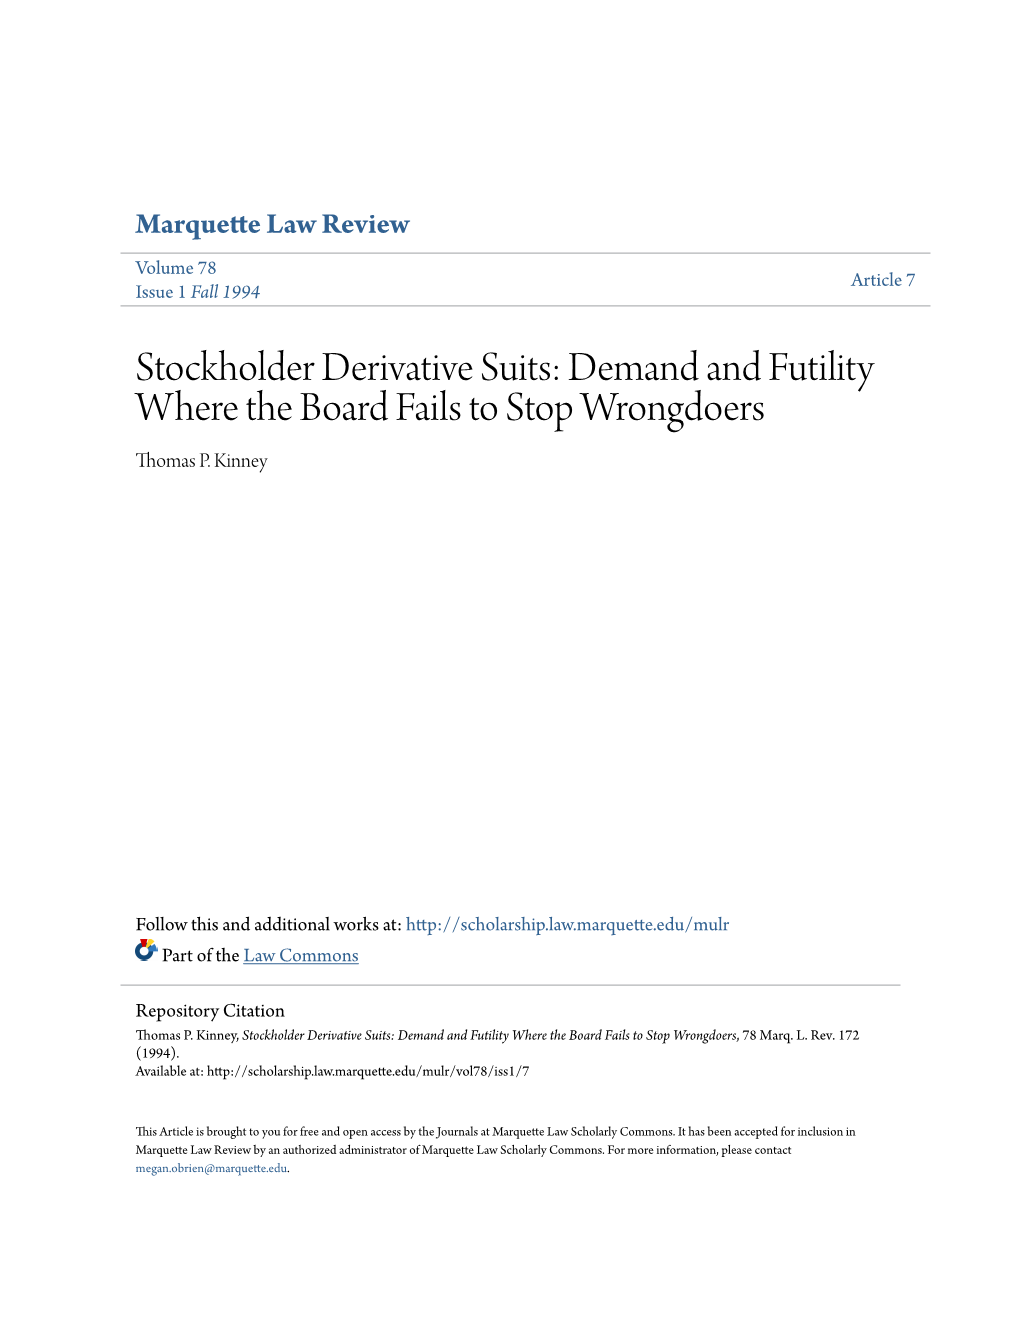 Stockholder Derivative Suits: Demand and Futility Where the Board Fails to Stop Wrongdoers Thomas P